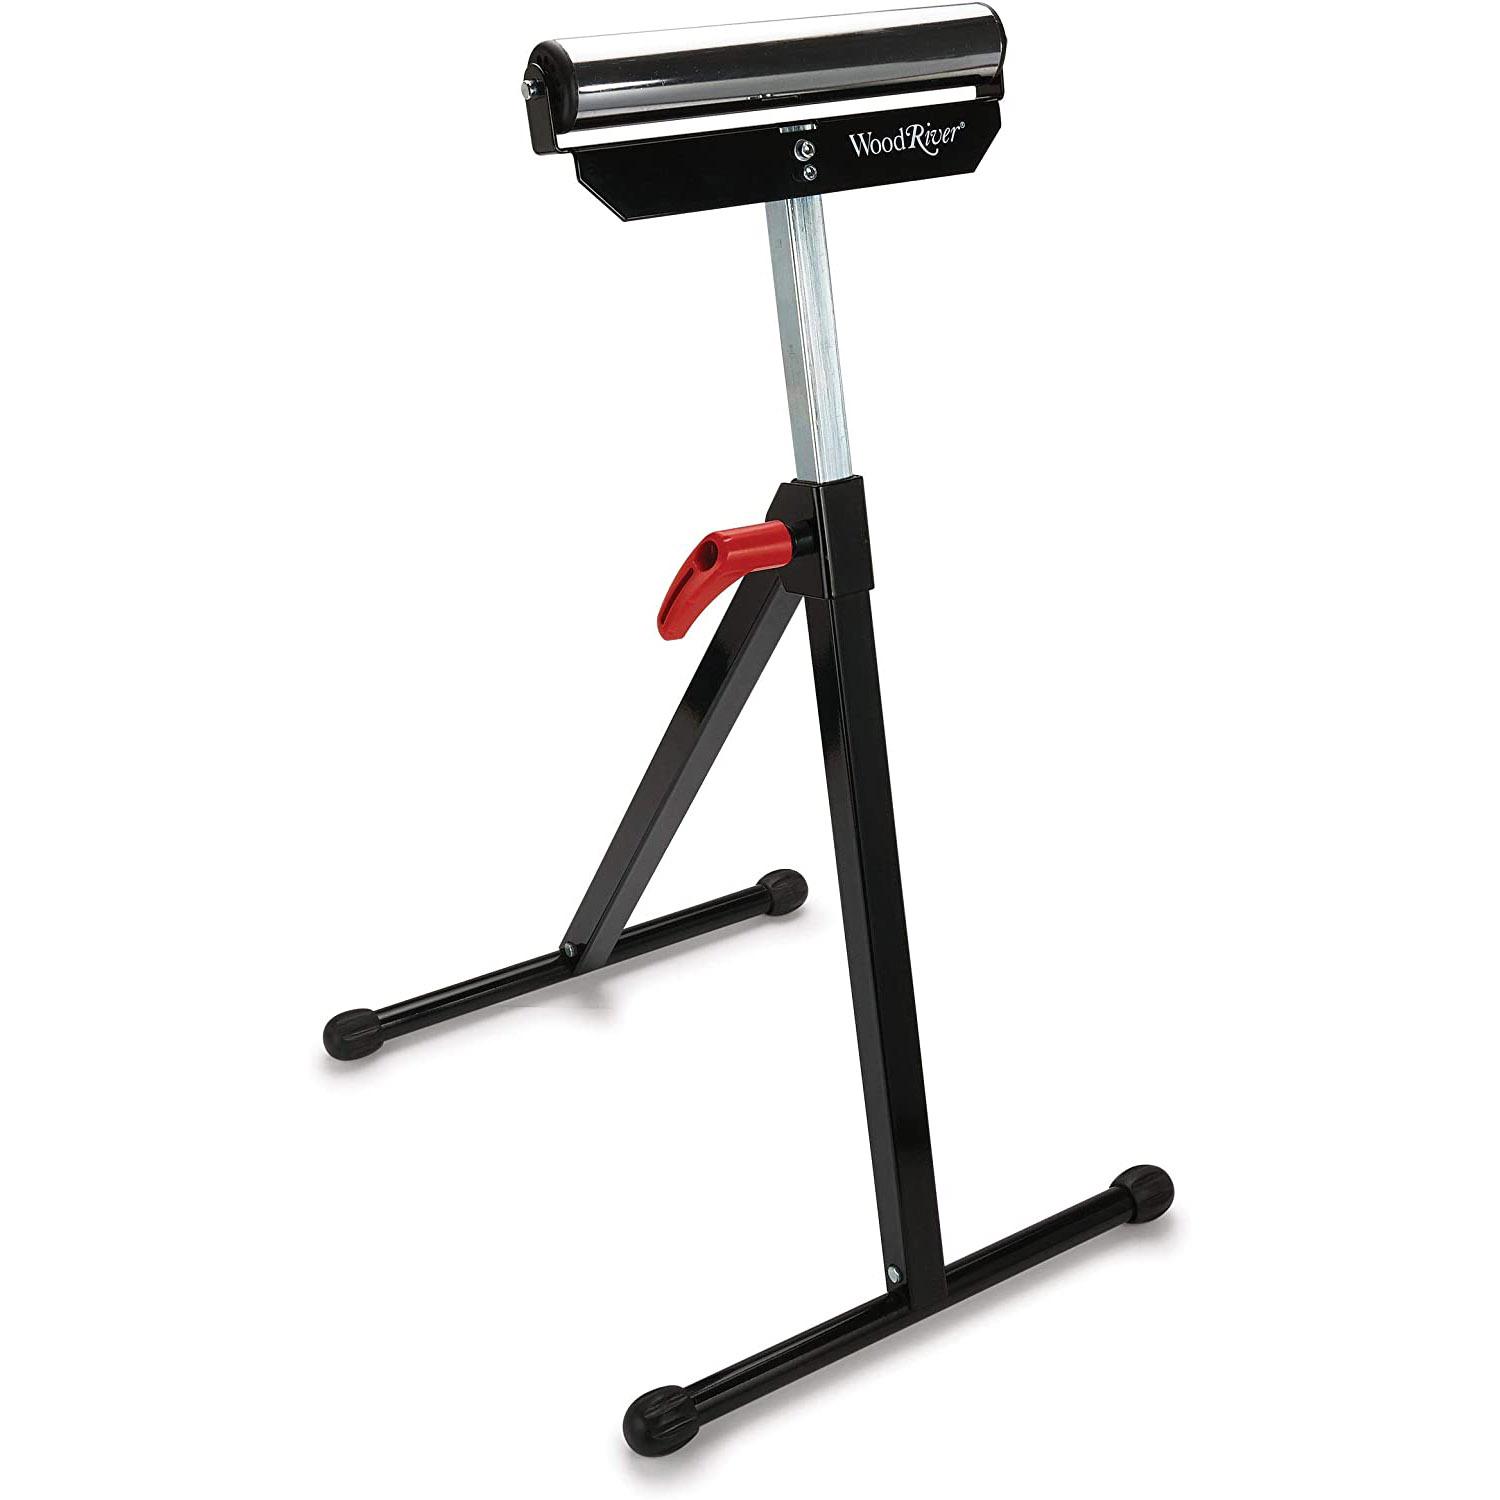 WoodRiver Single Roller Work Support Stand for $23.99